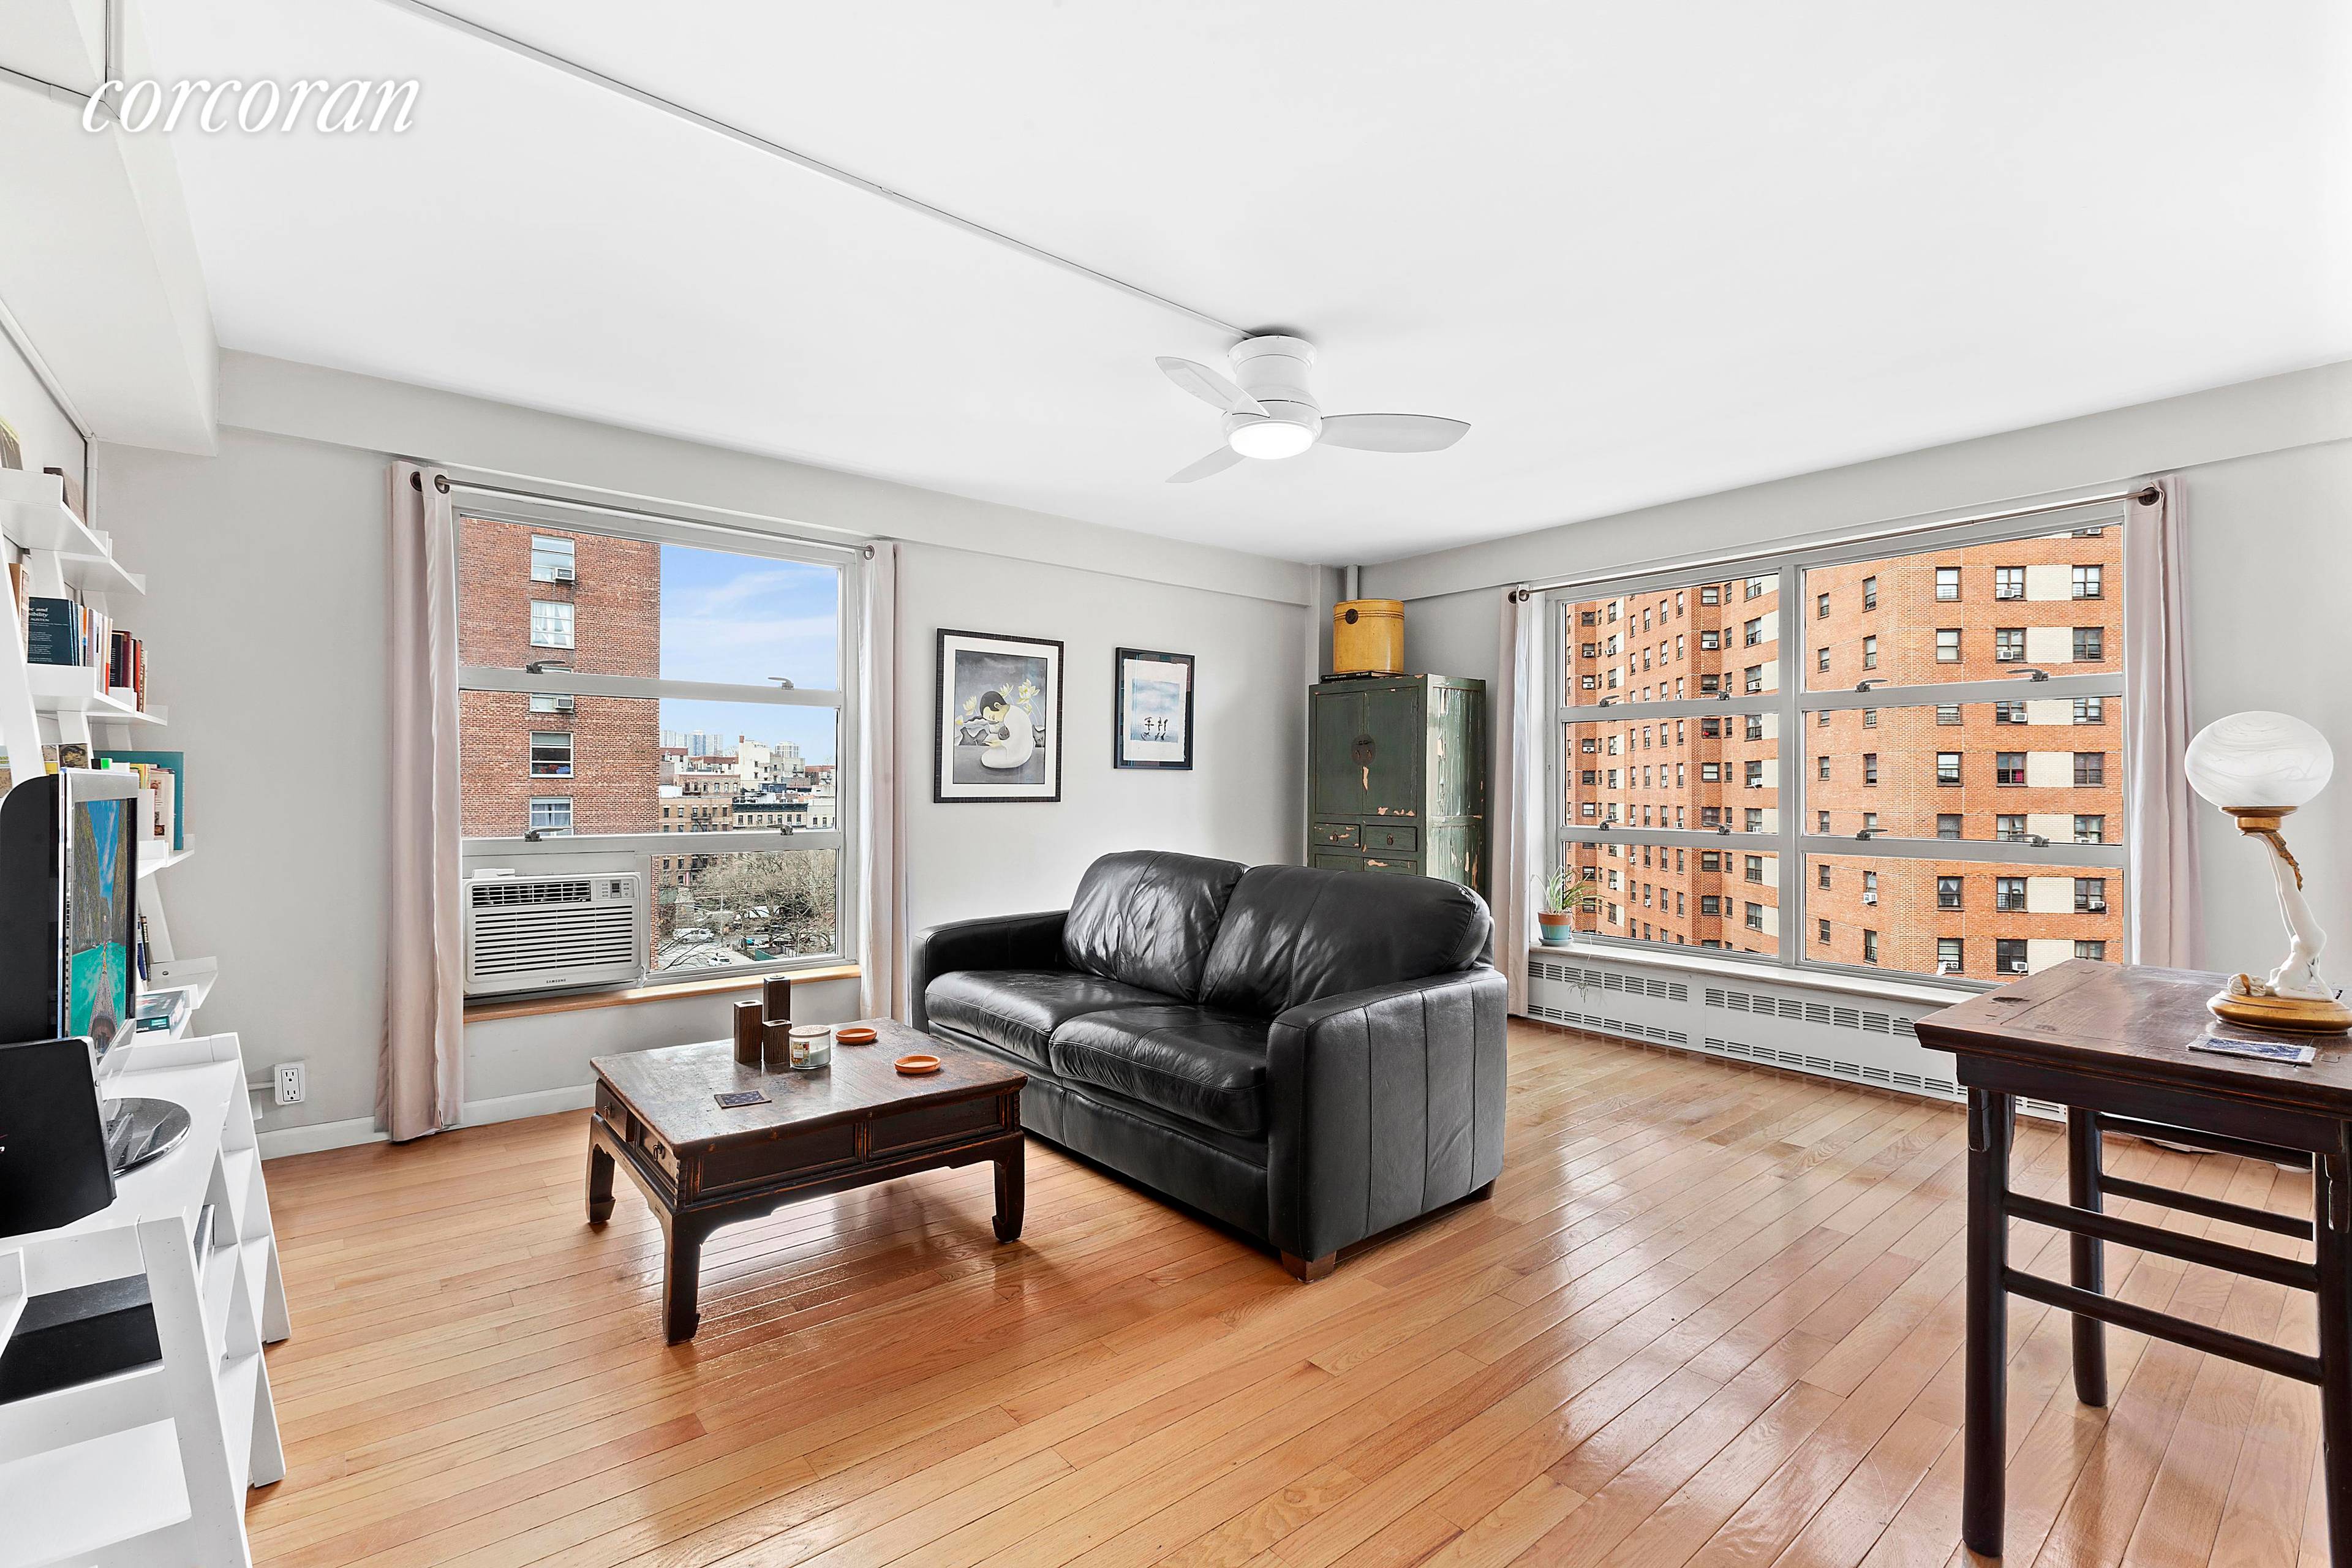 Ready to move in bright and spacious one bed one bath in Morningside heights neighborhood.